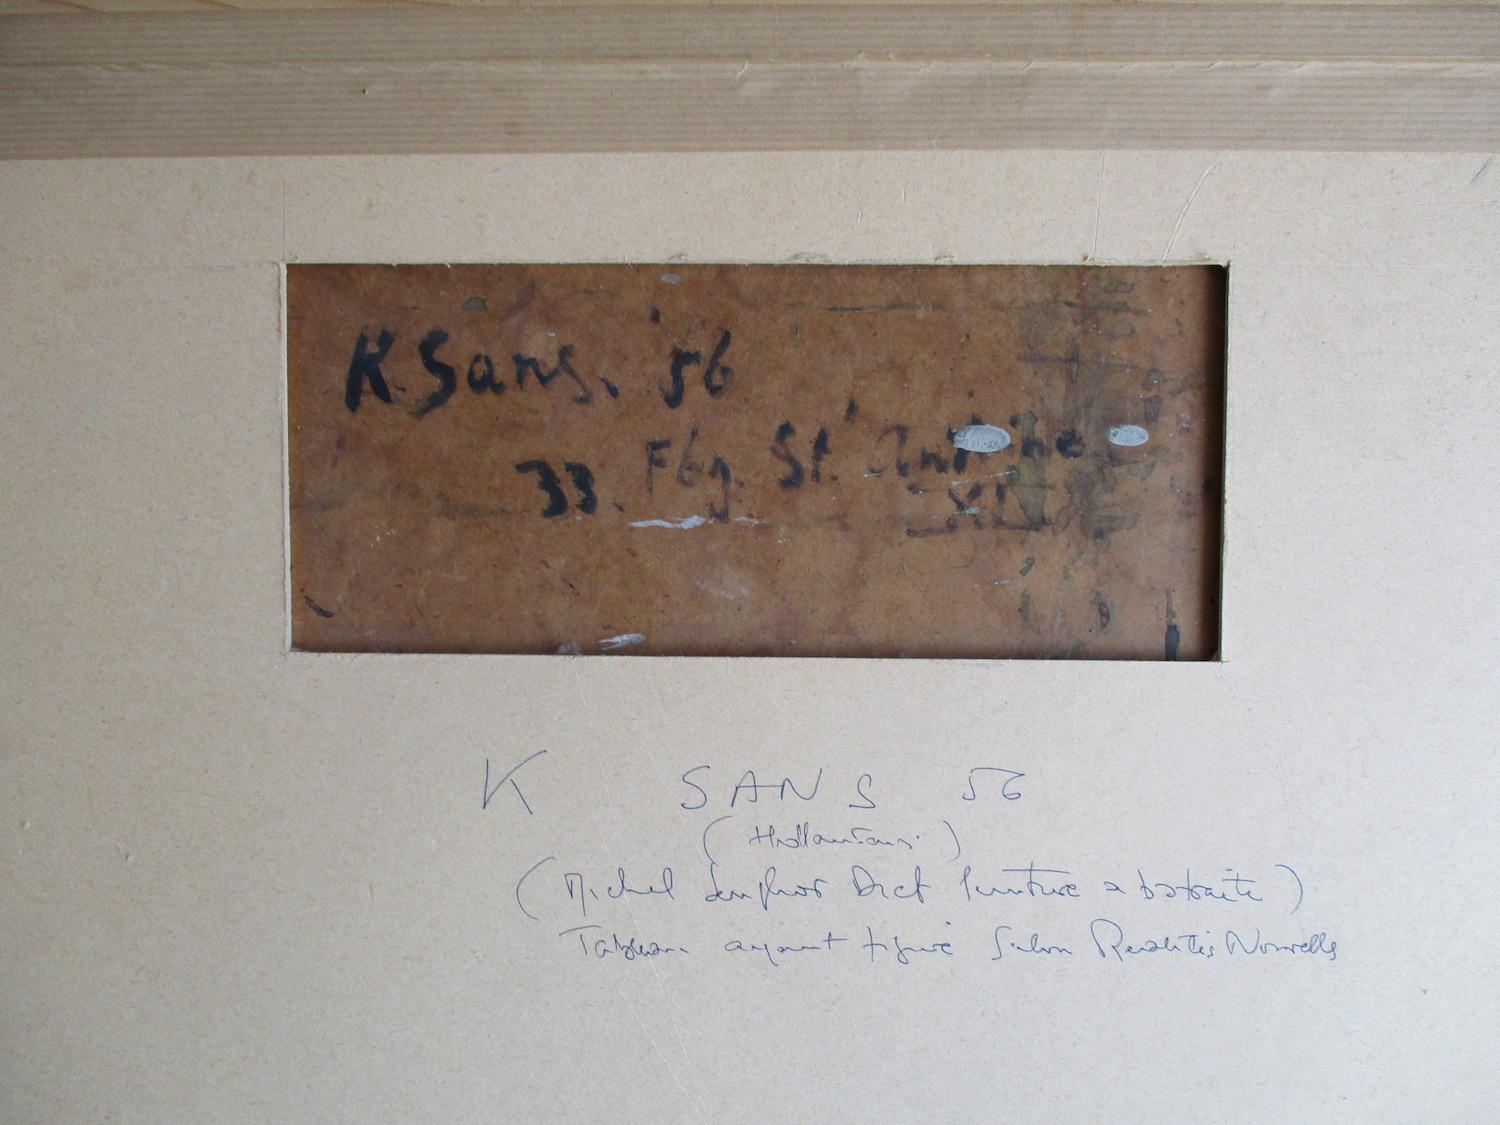 An extraordinary antique abstract oil on board by Klaas Sans. It is signed and dated 1956, bears on the verso the artist's address on Faubourg Saint Antoine in Paris and was - according to a previous owners' note on the back of the frame - exhibited